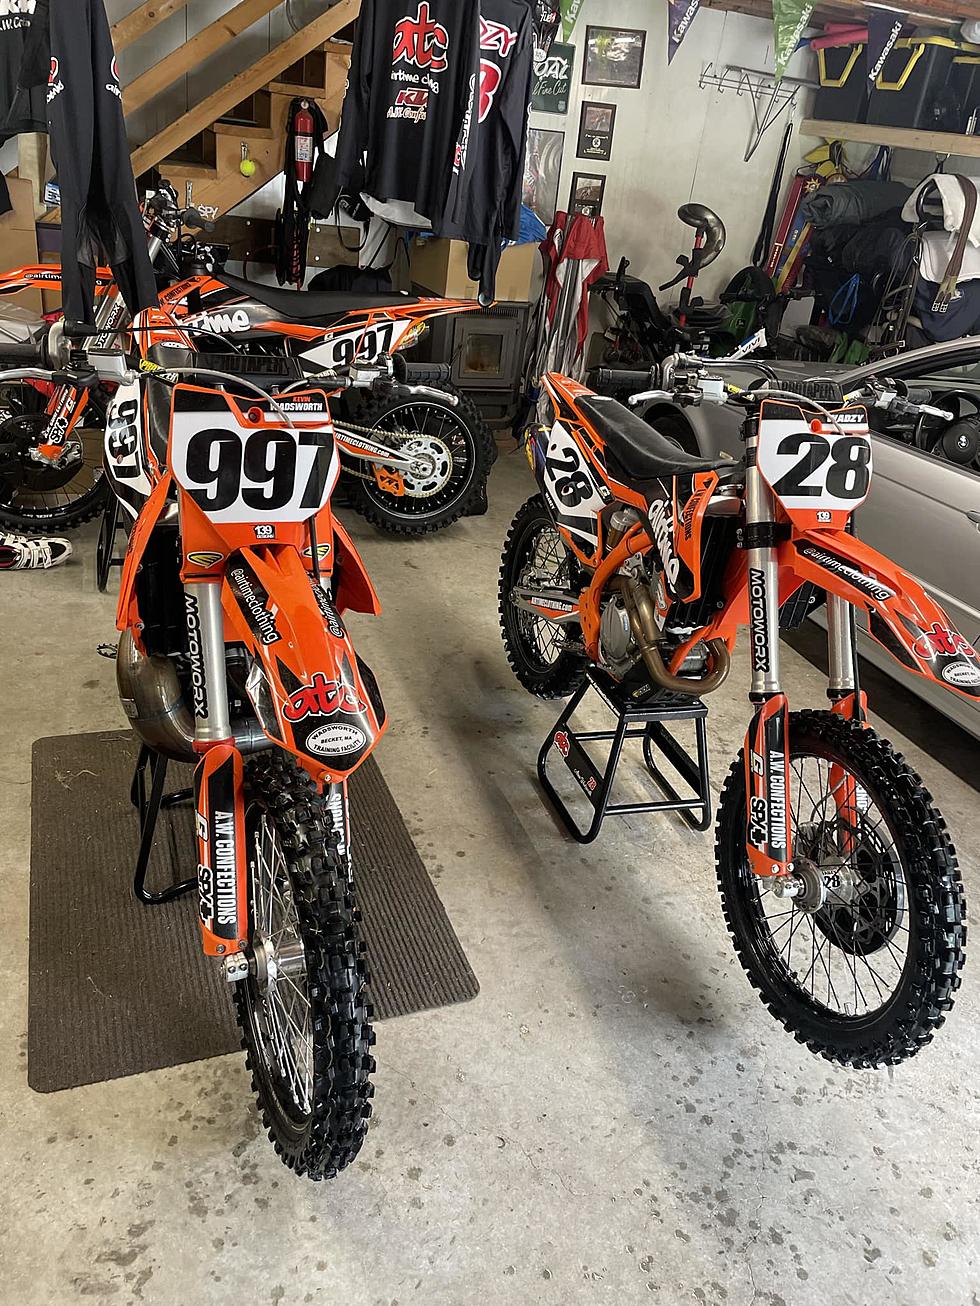 Attention MA. Residents! Have You Seen These Three Stolen Bikes?